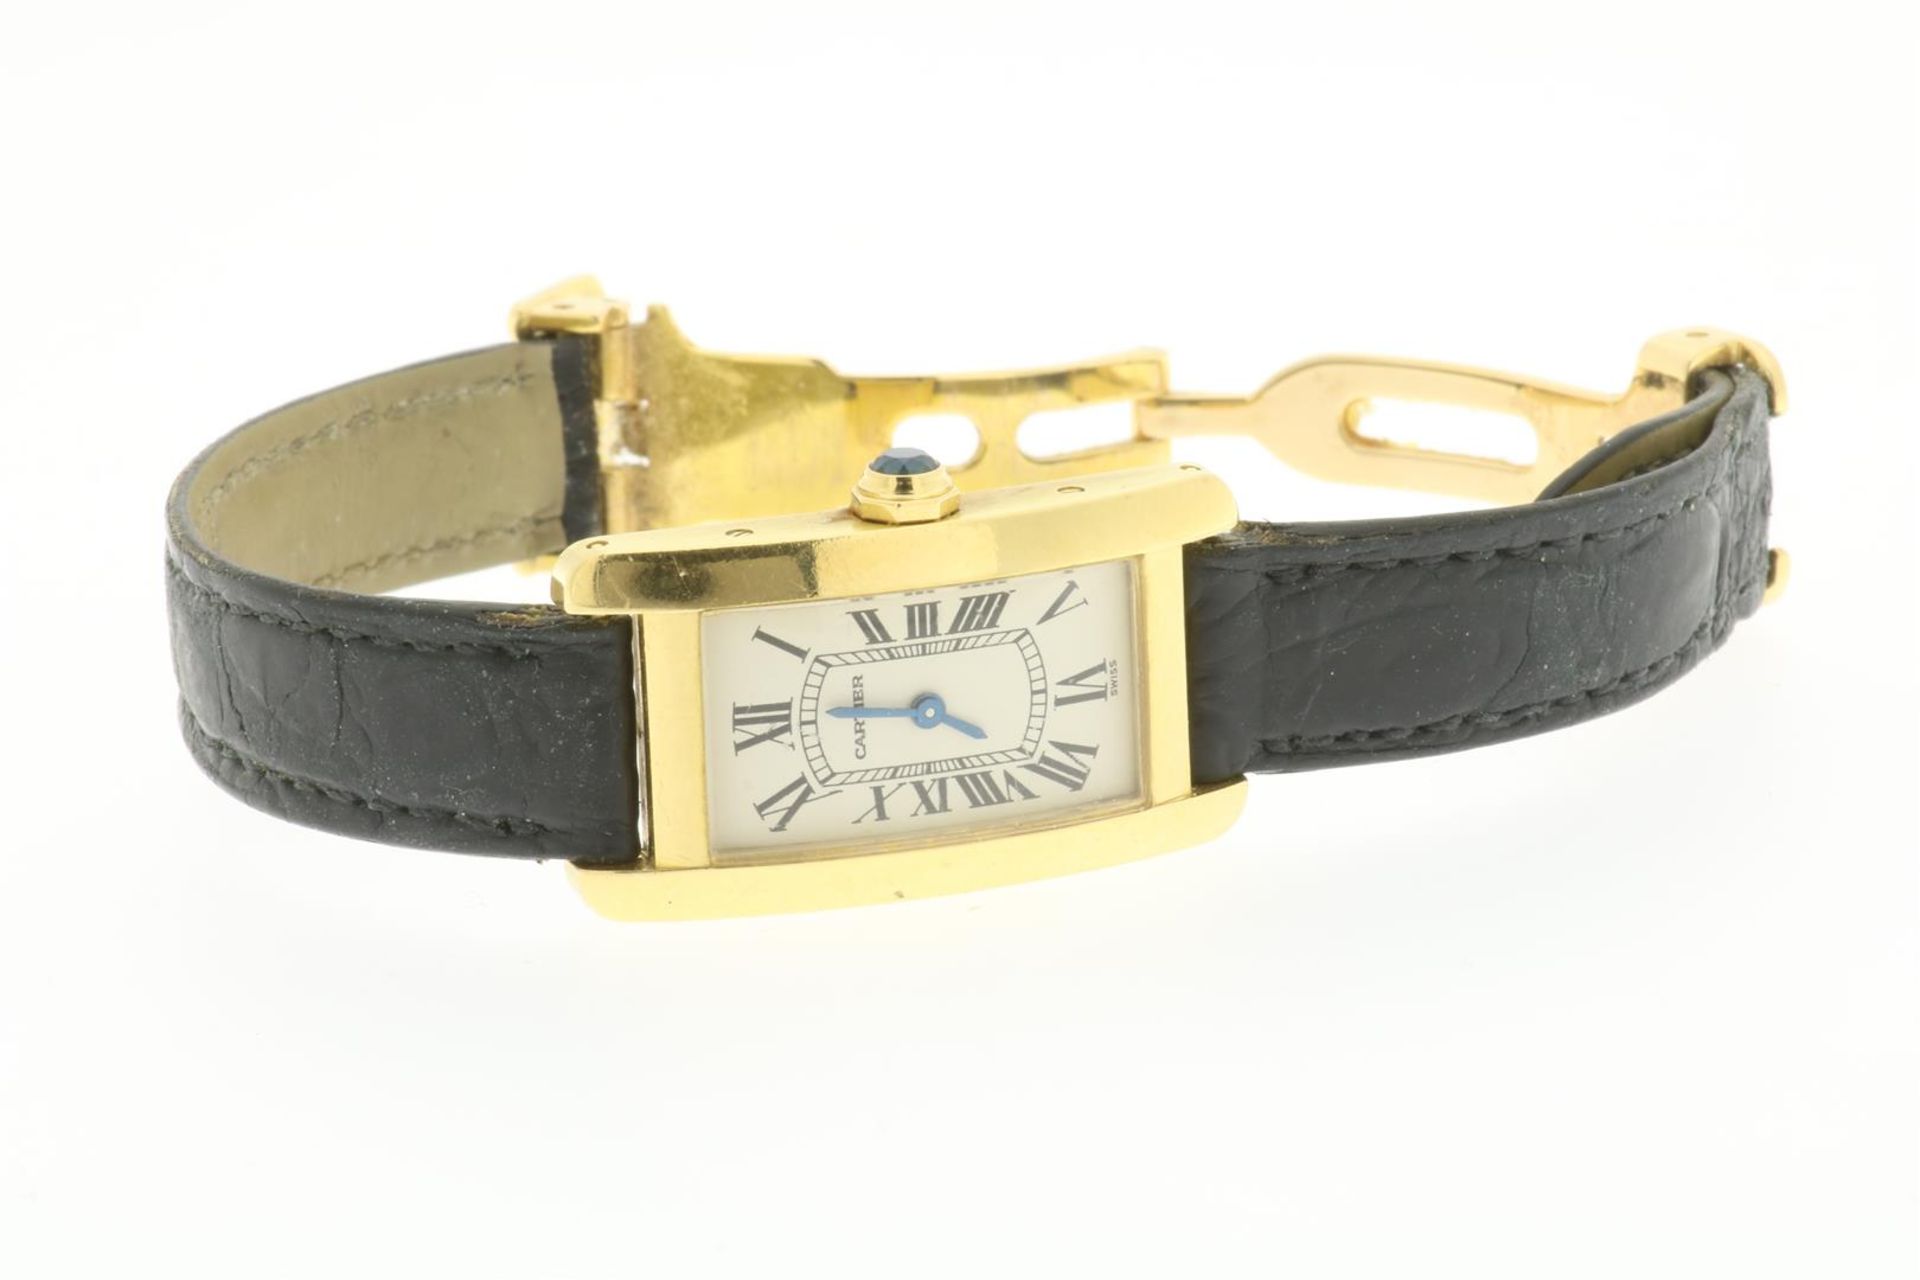 Cartier Tank Américaine, yellow gold women's wristwatch, on a leather strap with yellow gold Cartier